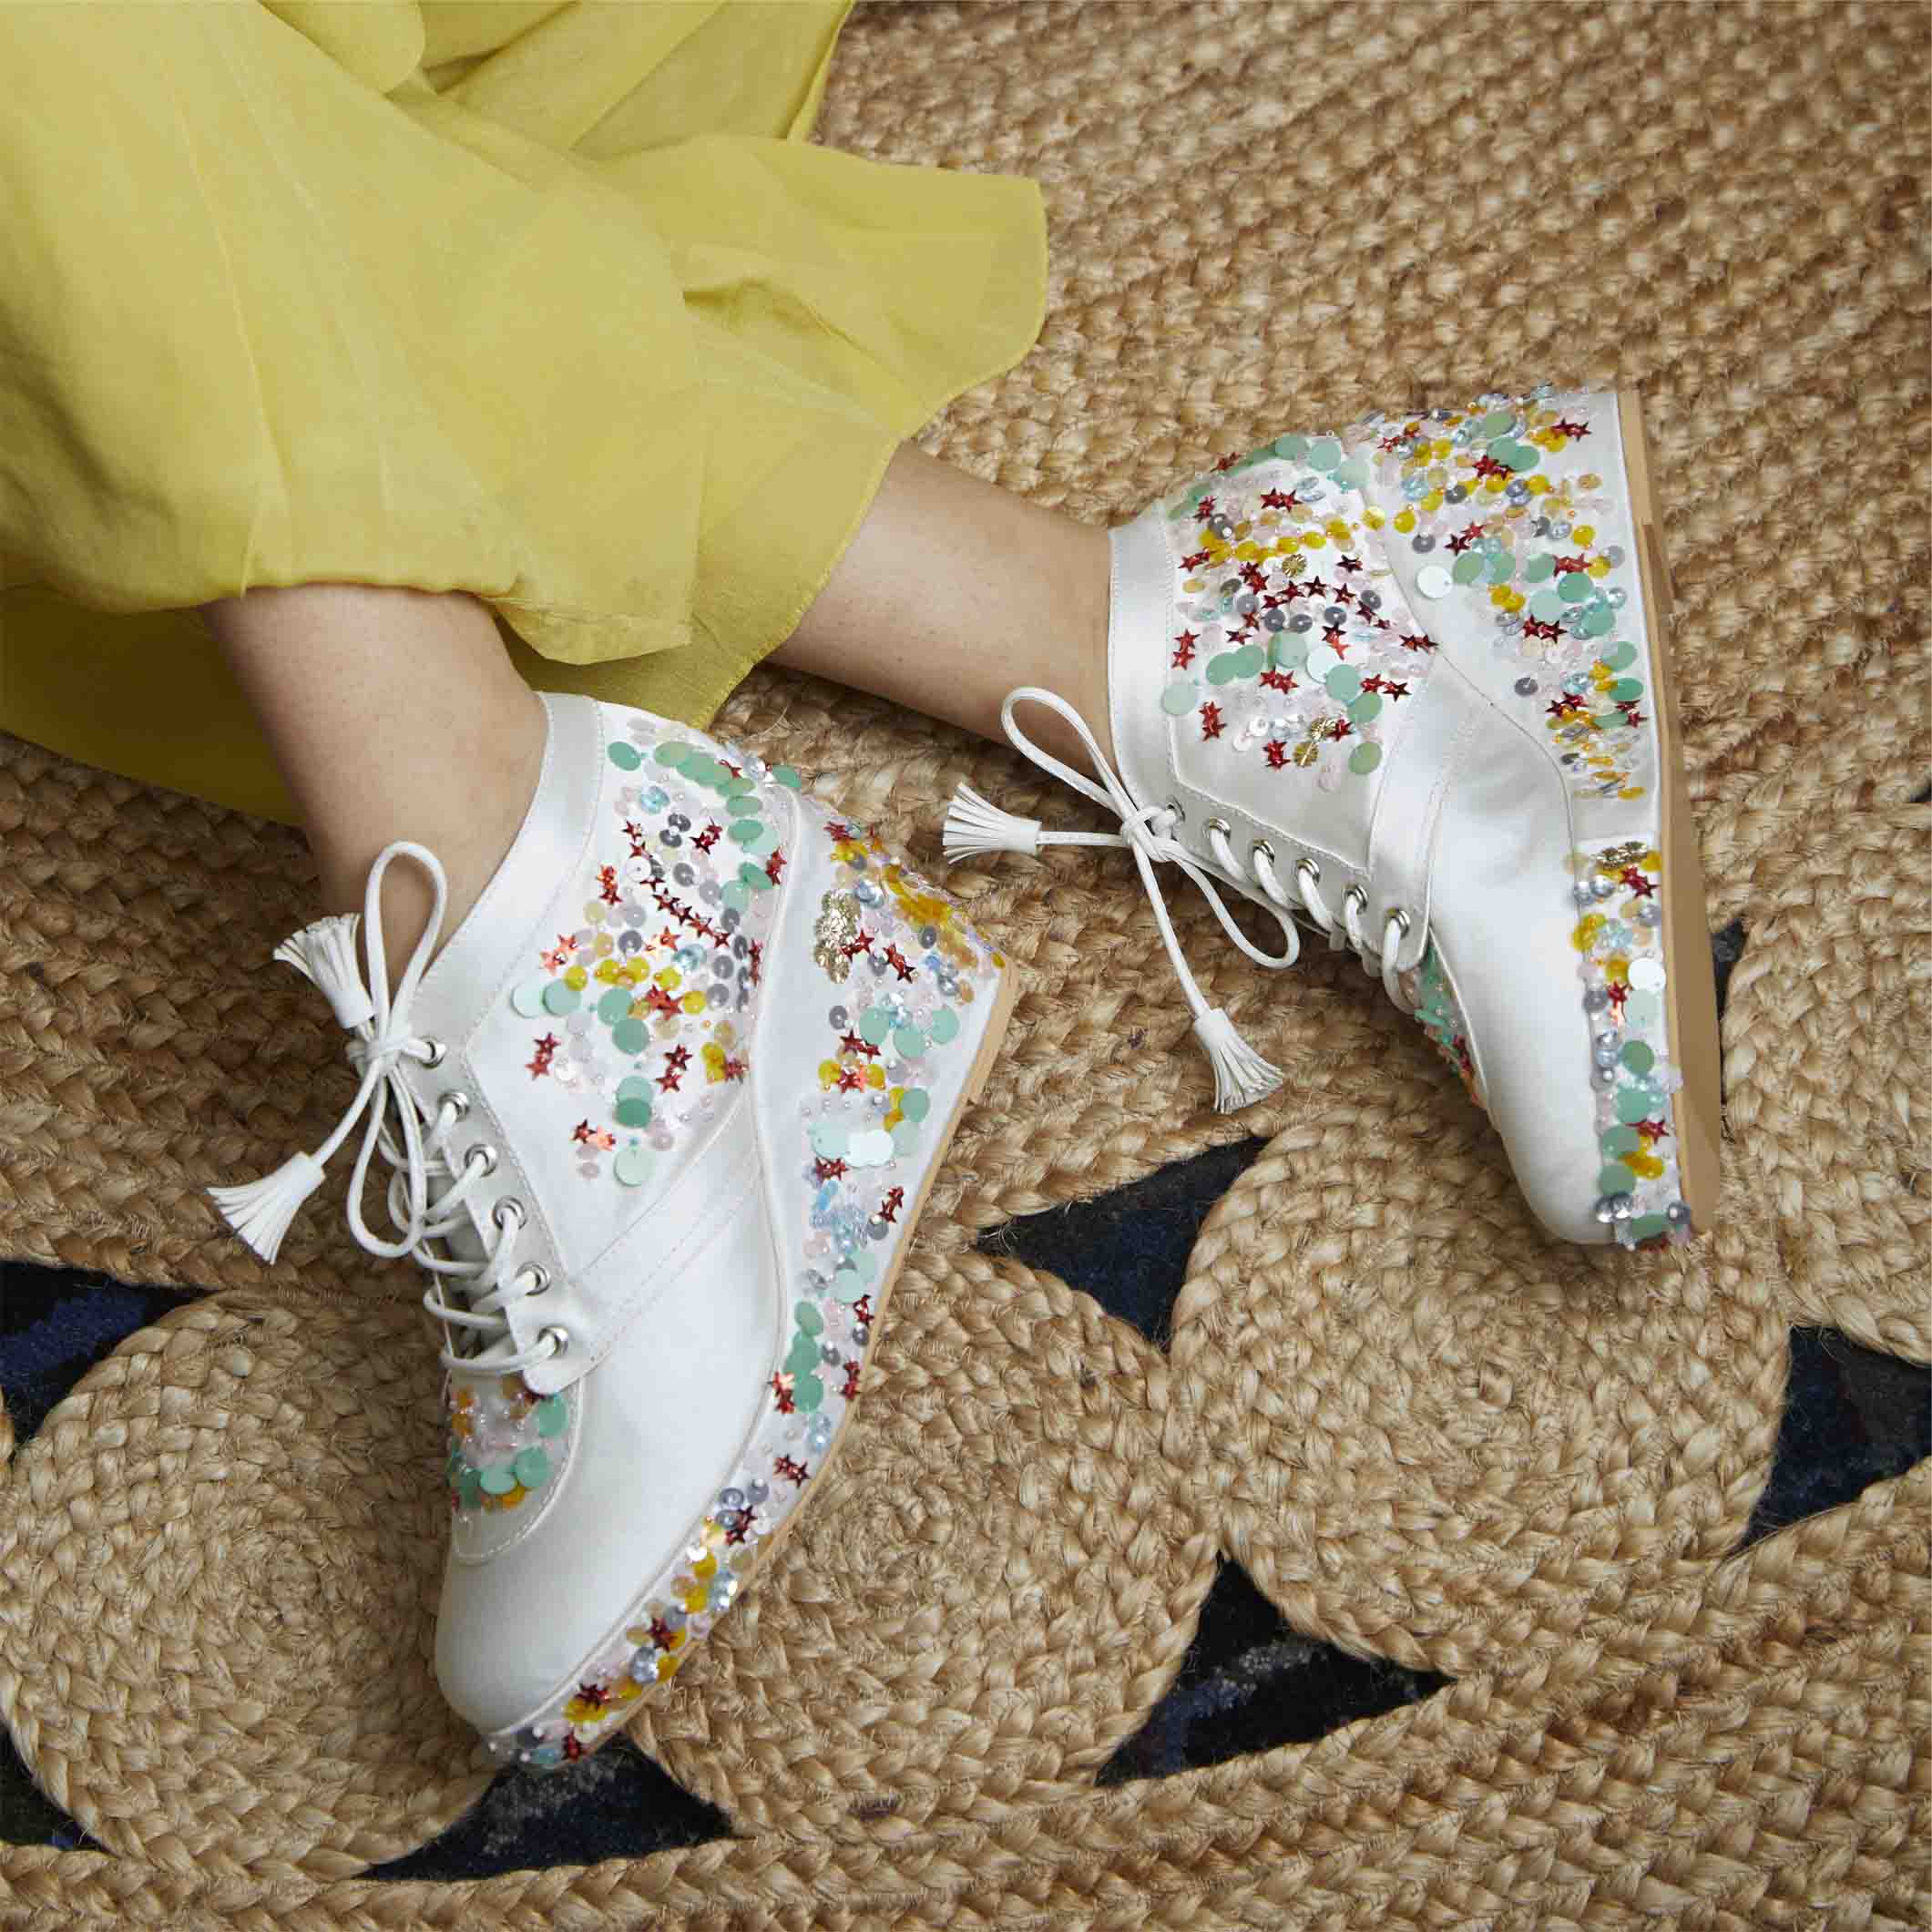 White Star Embroidered Bridal Sneaker Wedges - Customized Wedding Shoes | Tiesta